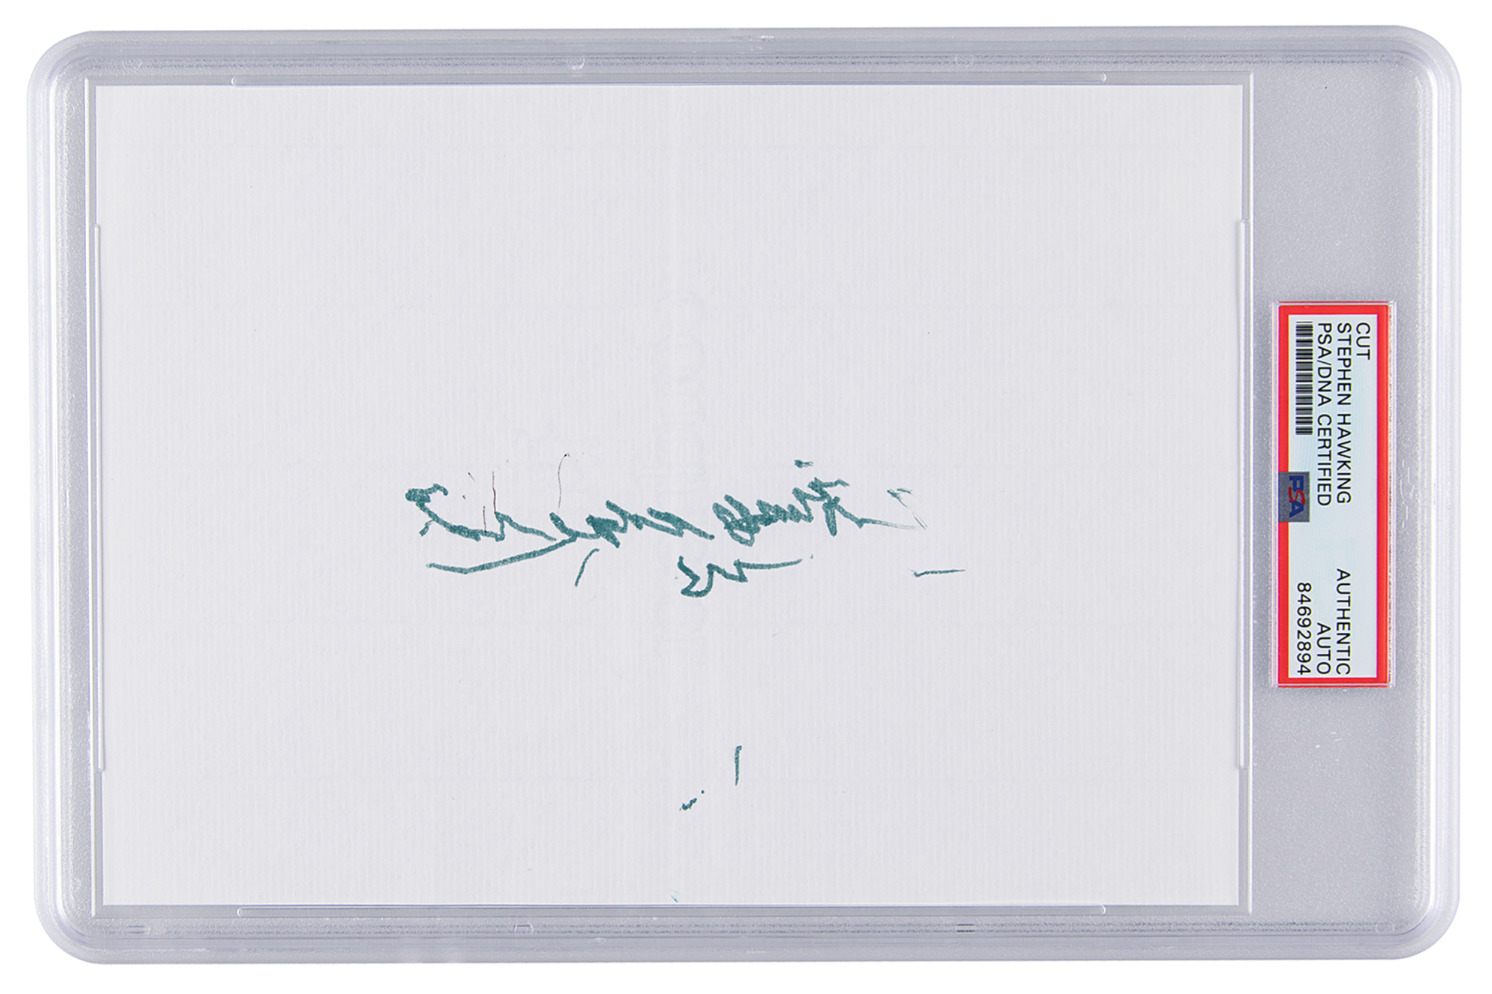 STEPHEN HAWKING Signed Autograph Cut W/ Jane Hawking Letter PSA DNA INCREDIBLE